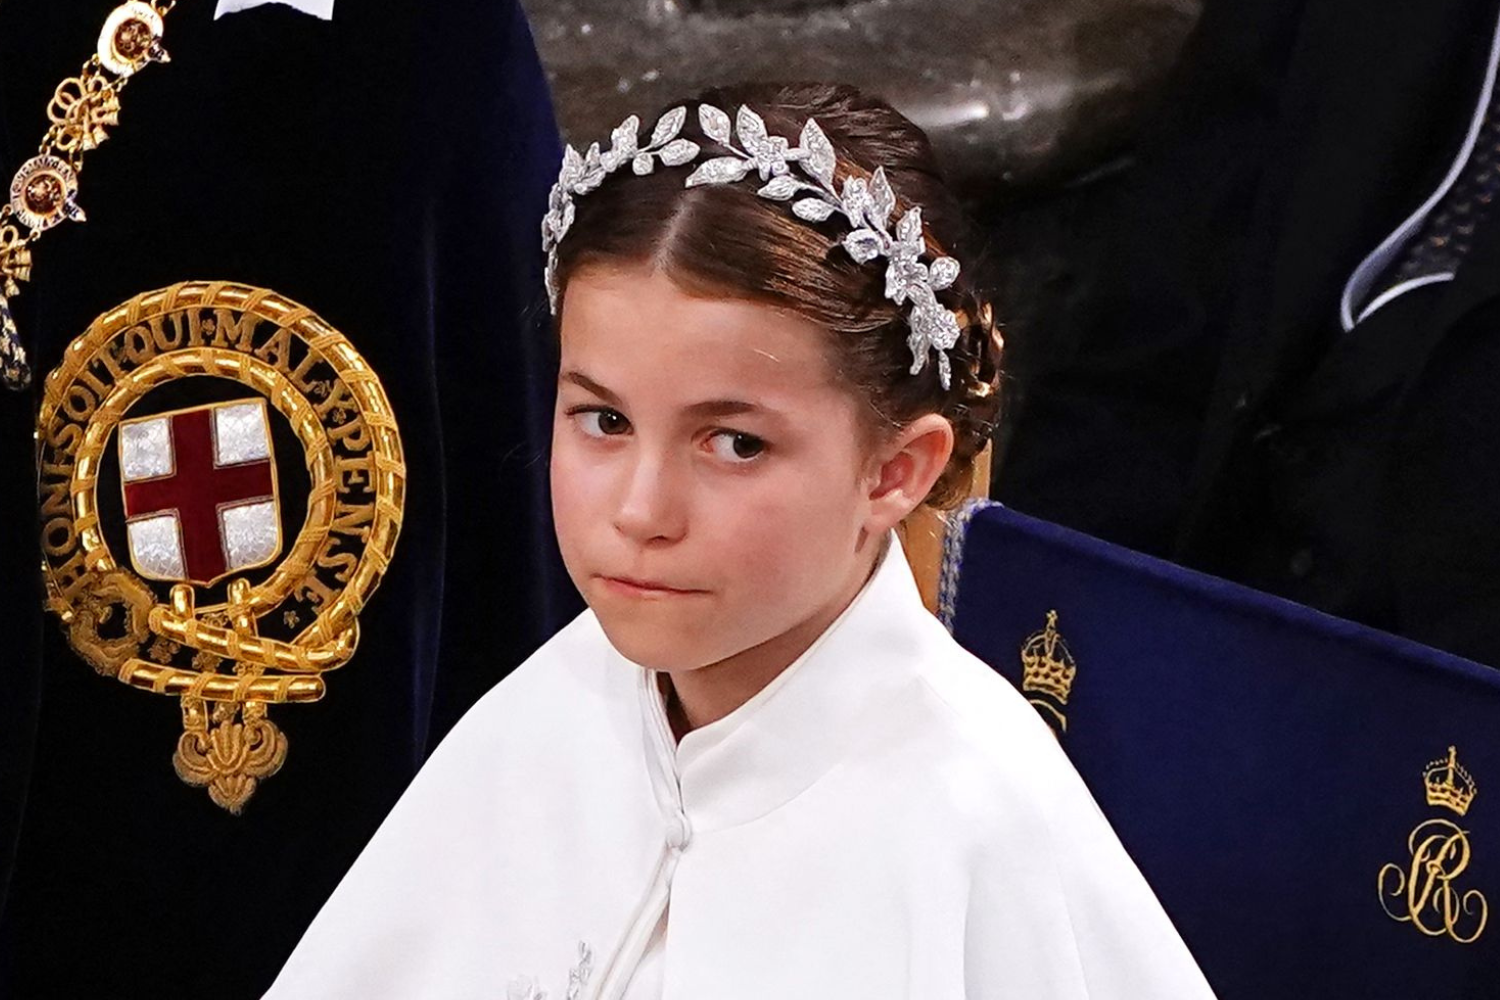 Princess Charlotte Is Kate Middleton's 'Mini-Me' in Coronation Couture